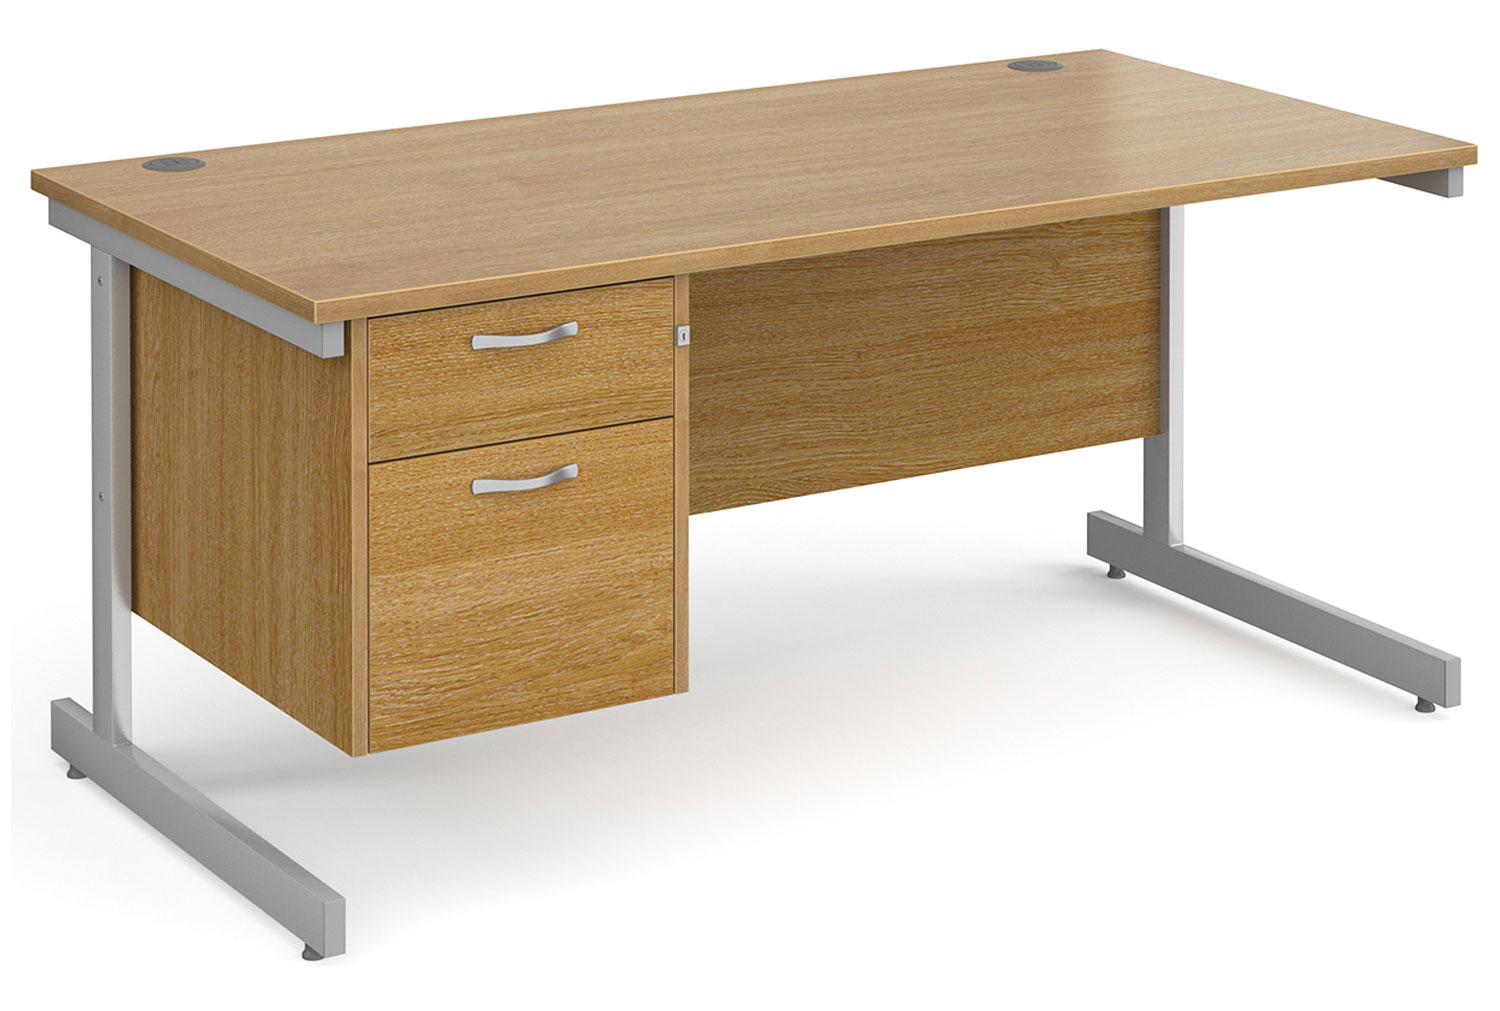 Thrifty Next-Day Rectangular Office Desk 2 Drawers Oak, 160wx80dx73h (cm), Express Delivery